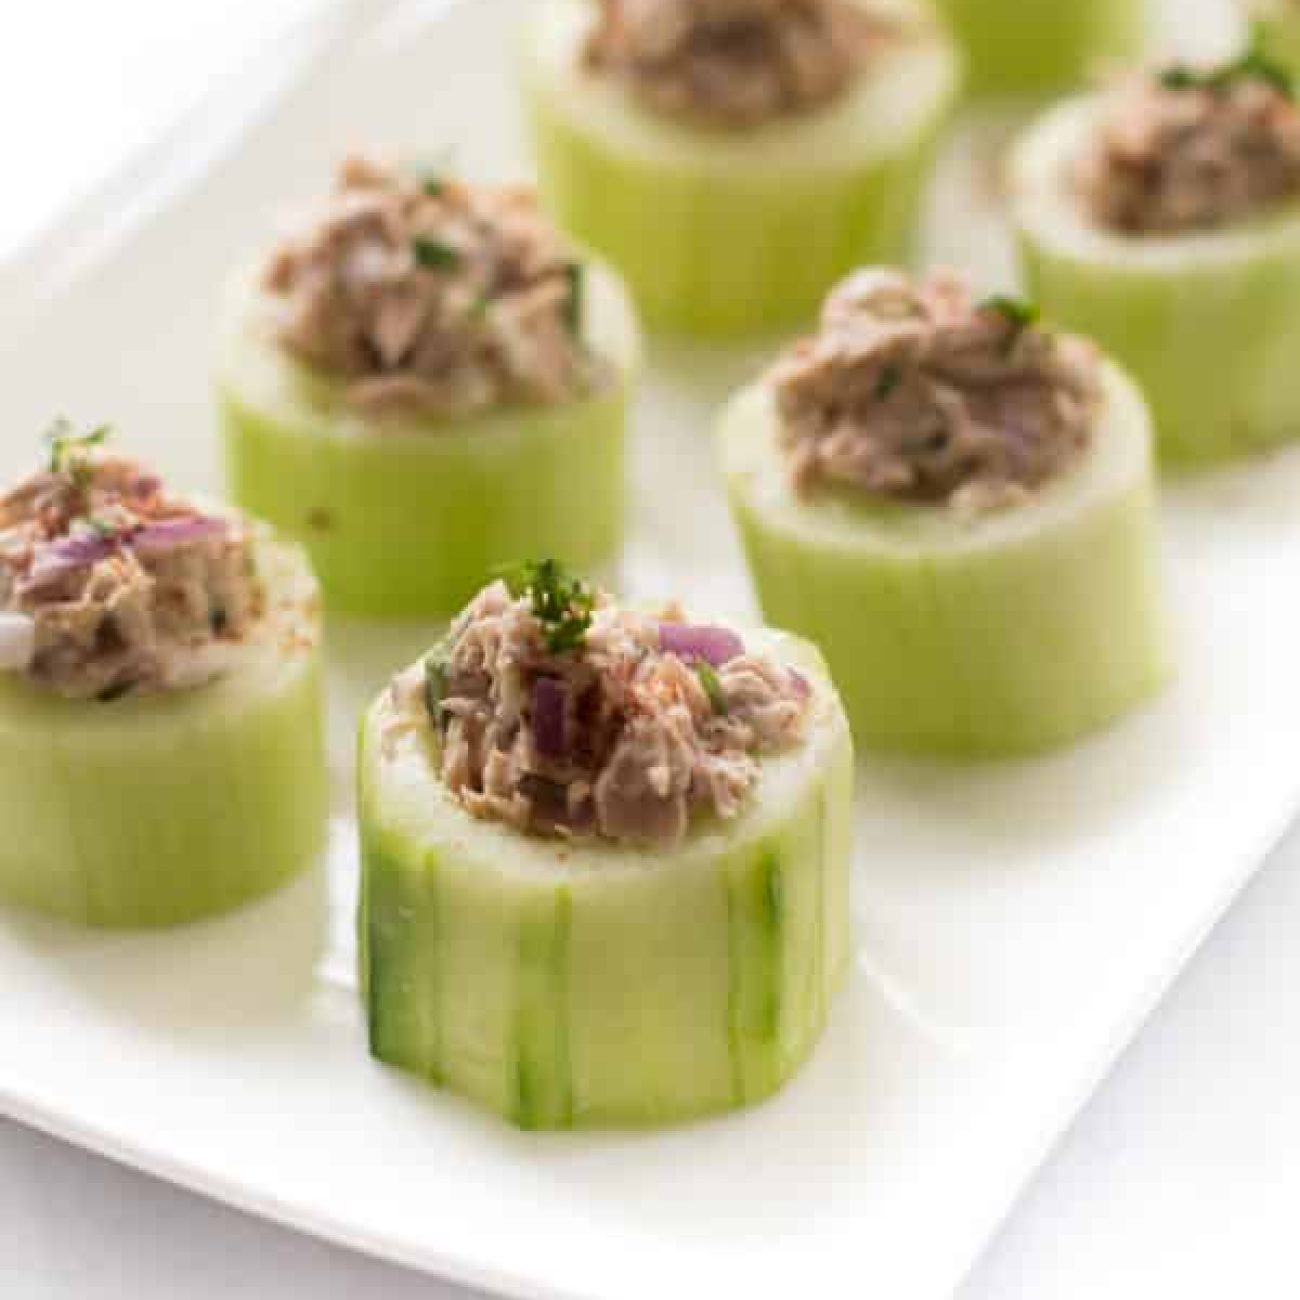 Crisp Cucumber Cups Stuffed with Flavorful Fillings